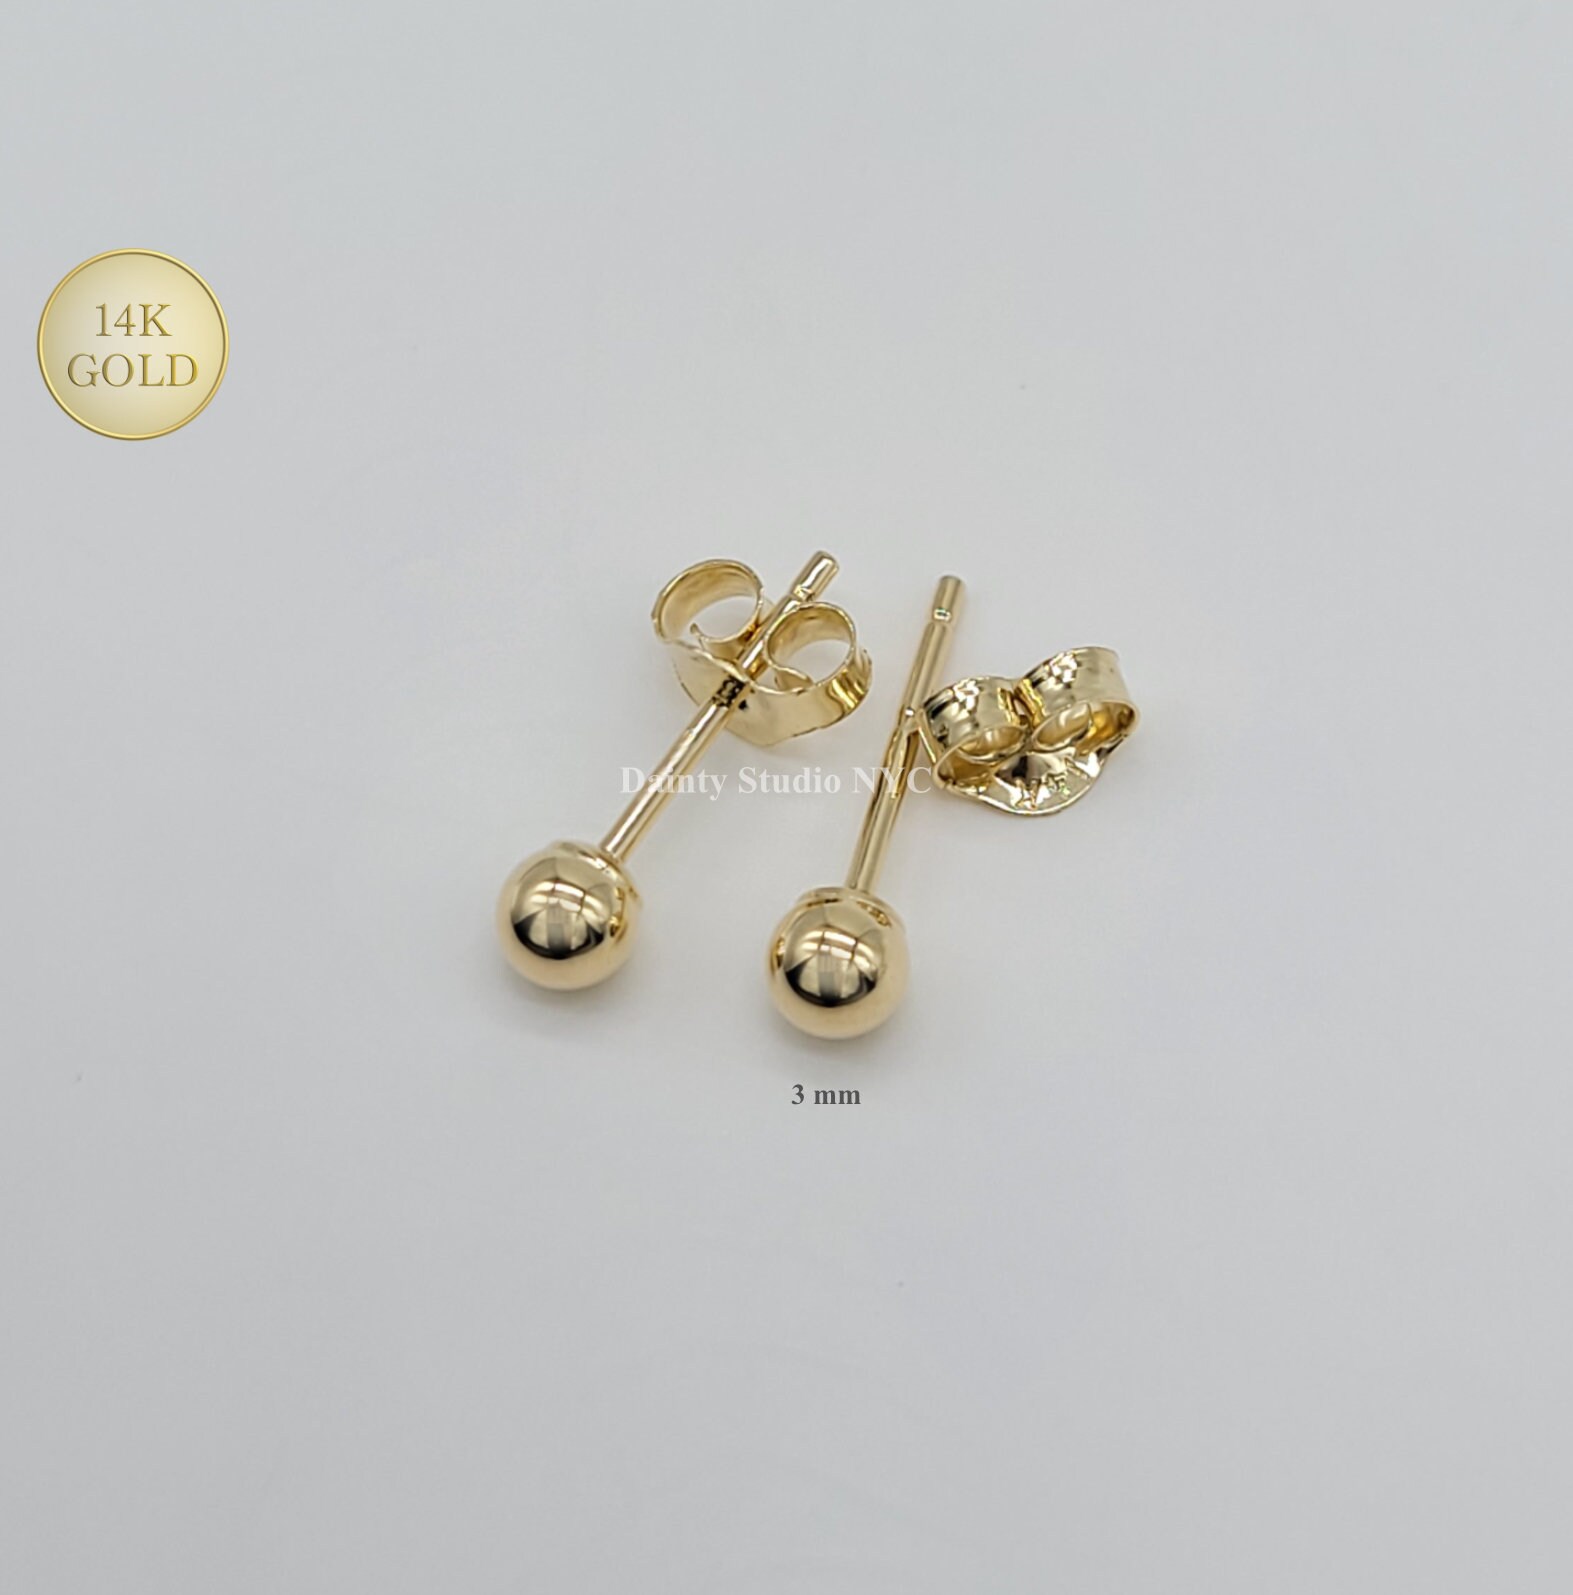 3MM 4MM 5MM 14K Solid Gold Tiny Ball Studs Earrings 14K | Etsy